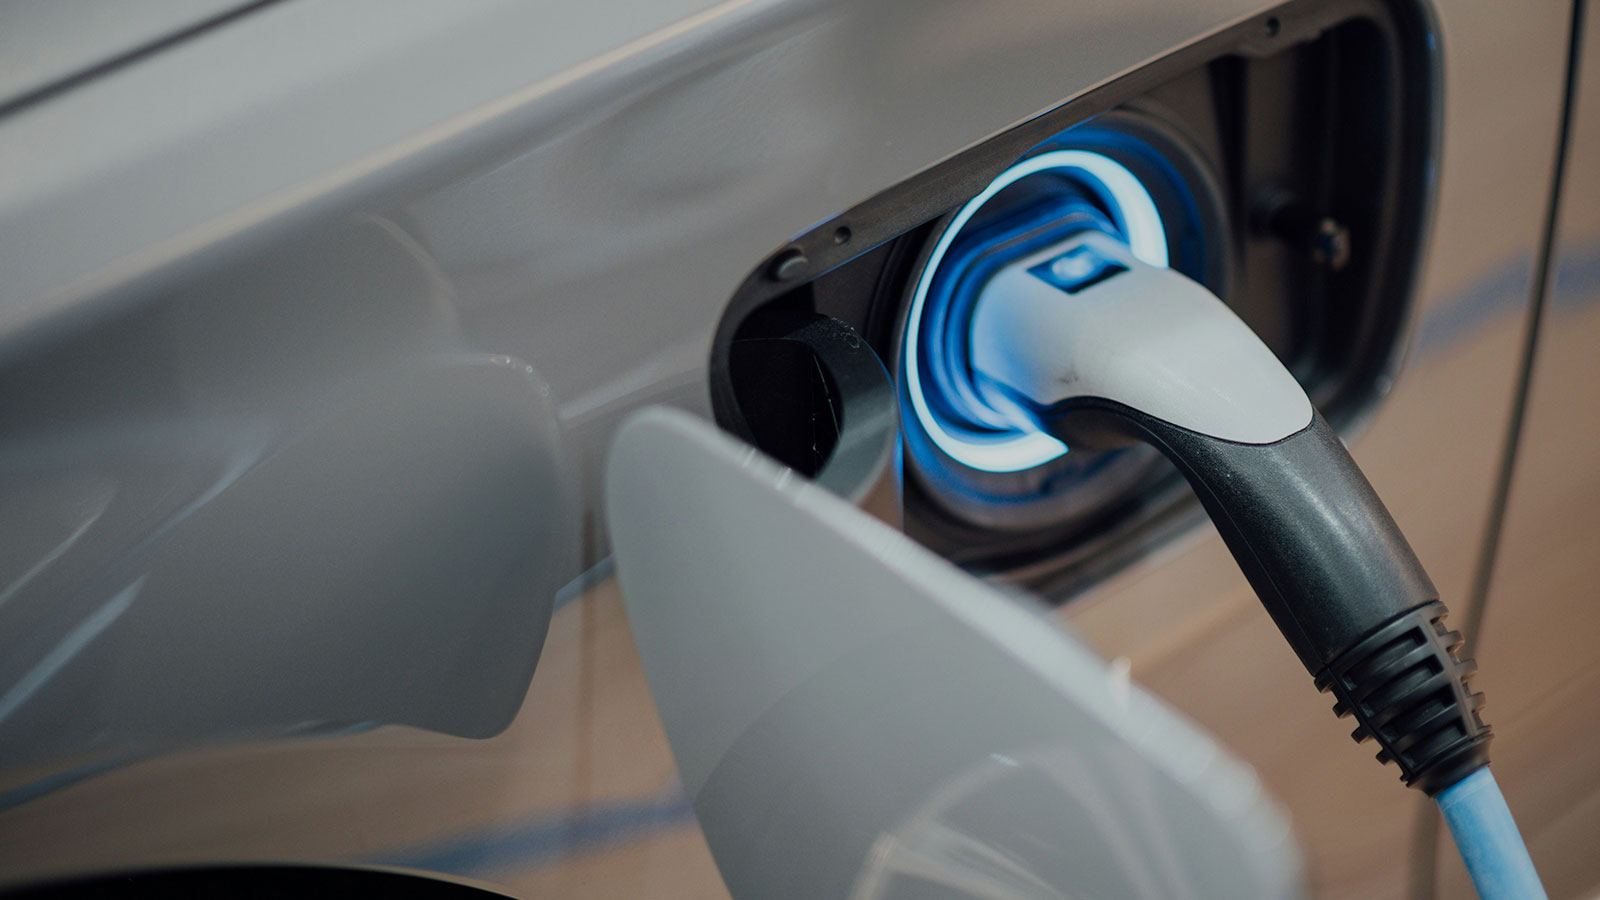 UK Power Networks has unveiled the UK’s first open-source power cut software aimed at enhancing electric vehicle (EV) charging reliability, dubbed Powercast.